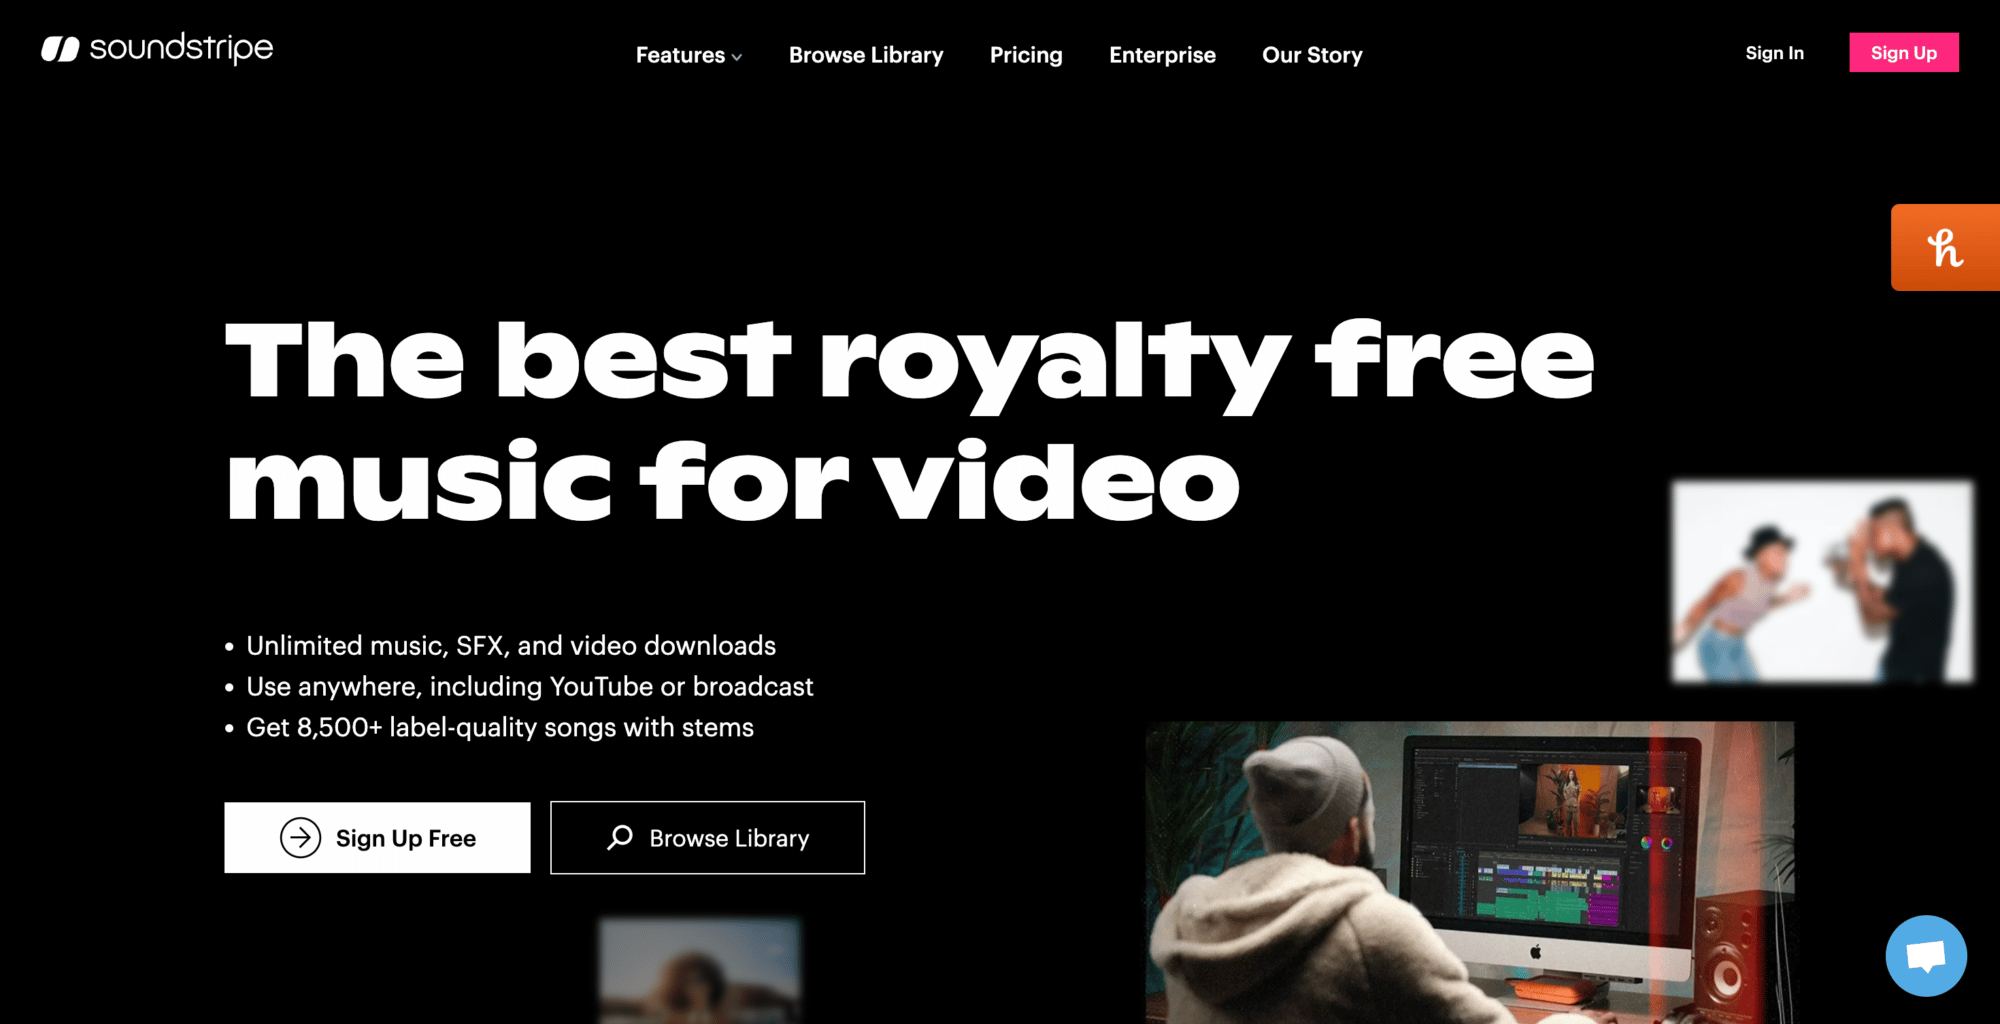 The Top 4 Royalty Free Music Genres for Gaming Videos